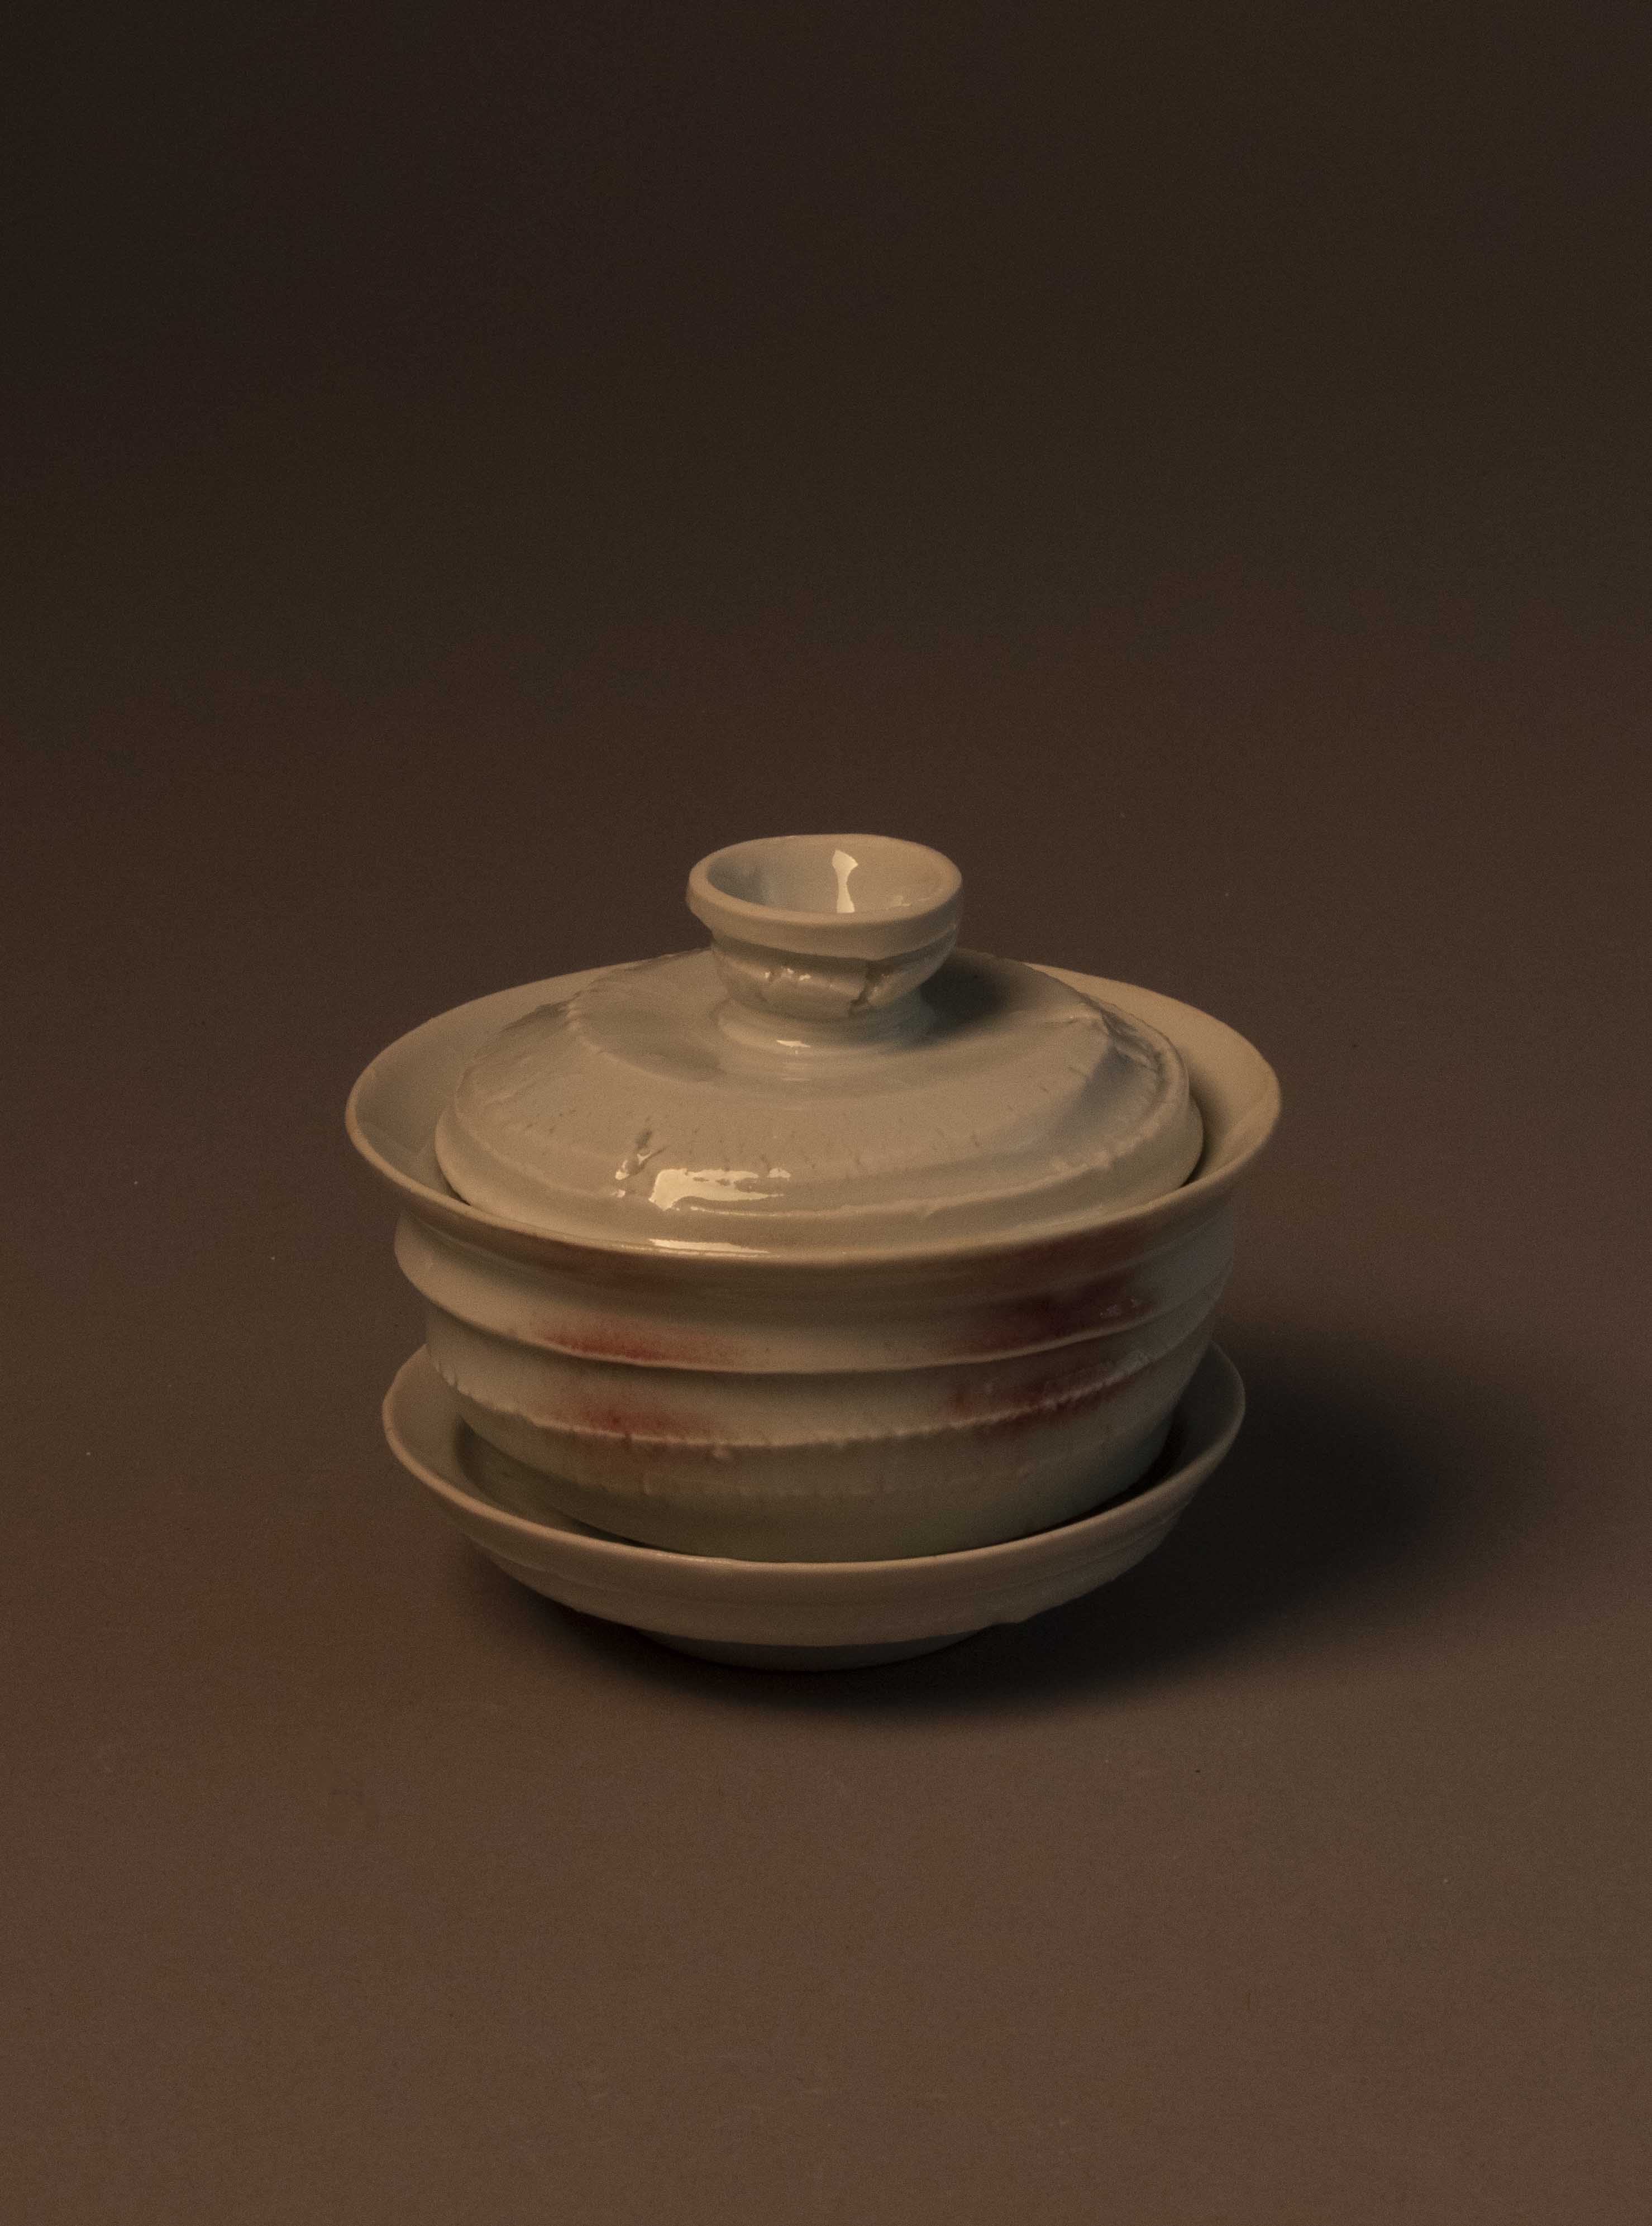 A three-part vessel for steeping tea – consisting of a saucer, a bowl-shaped cup with an outward-flaring lip, and a lid with a knob. The exterior surfaces have some slightly abrasive ridges and texture from the stretching of the clay during throwing. The slight roughness contrasts the delicacy of the vessel (evident in the apparent thinness of the rims of the cup and saucer), and the glassy glaze.